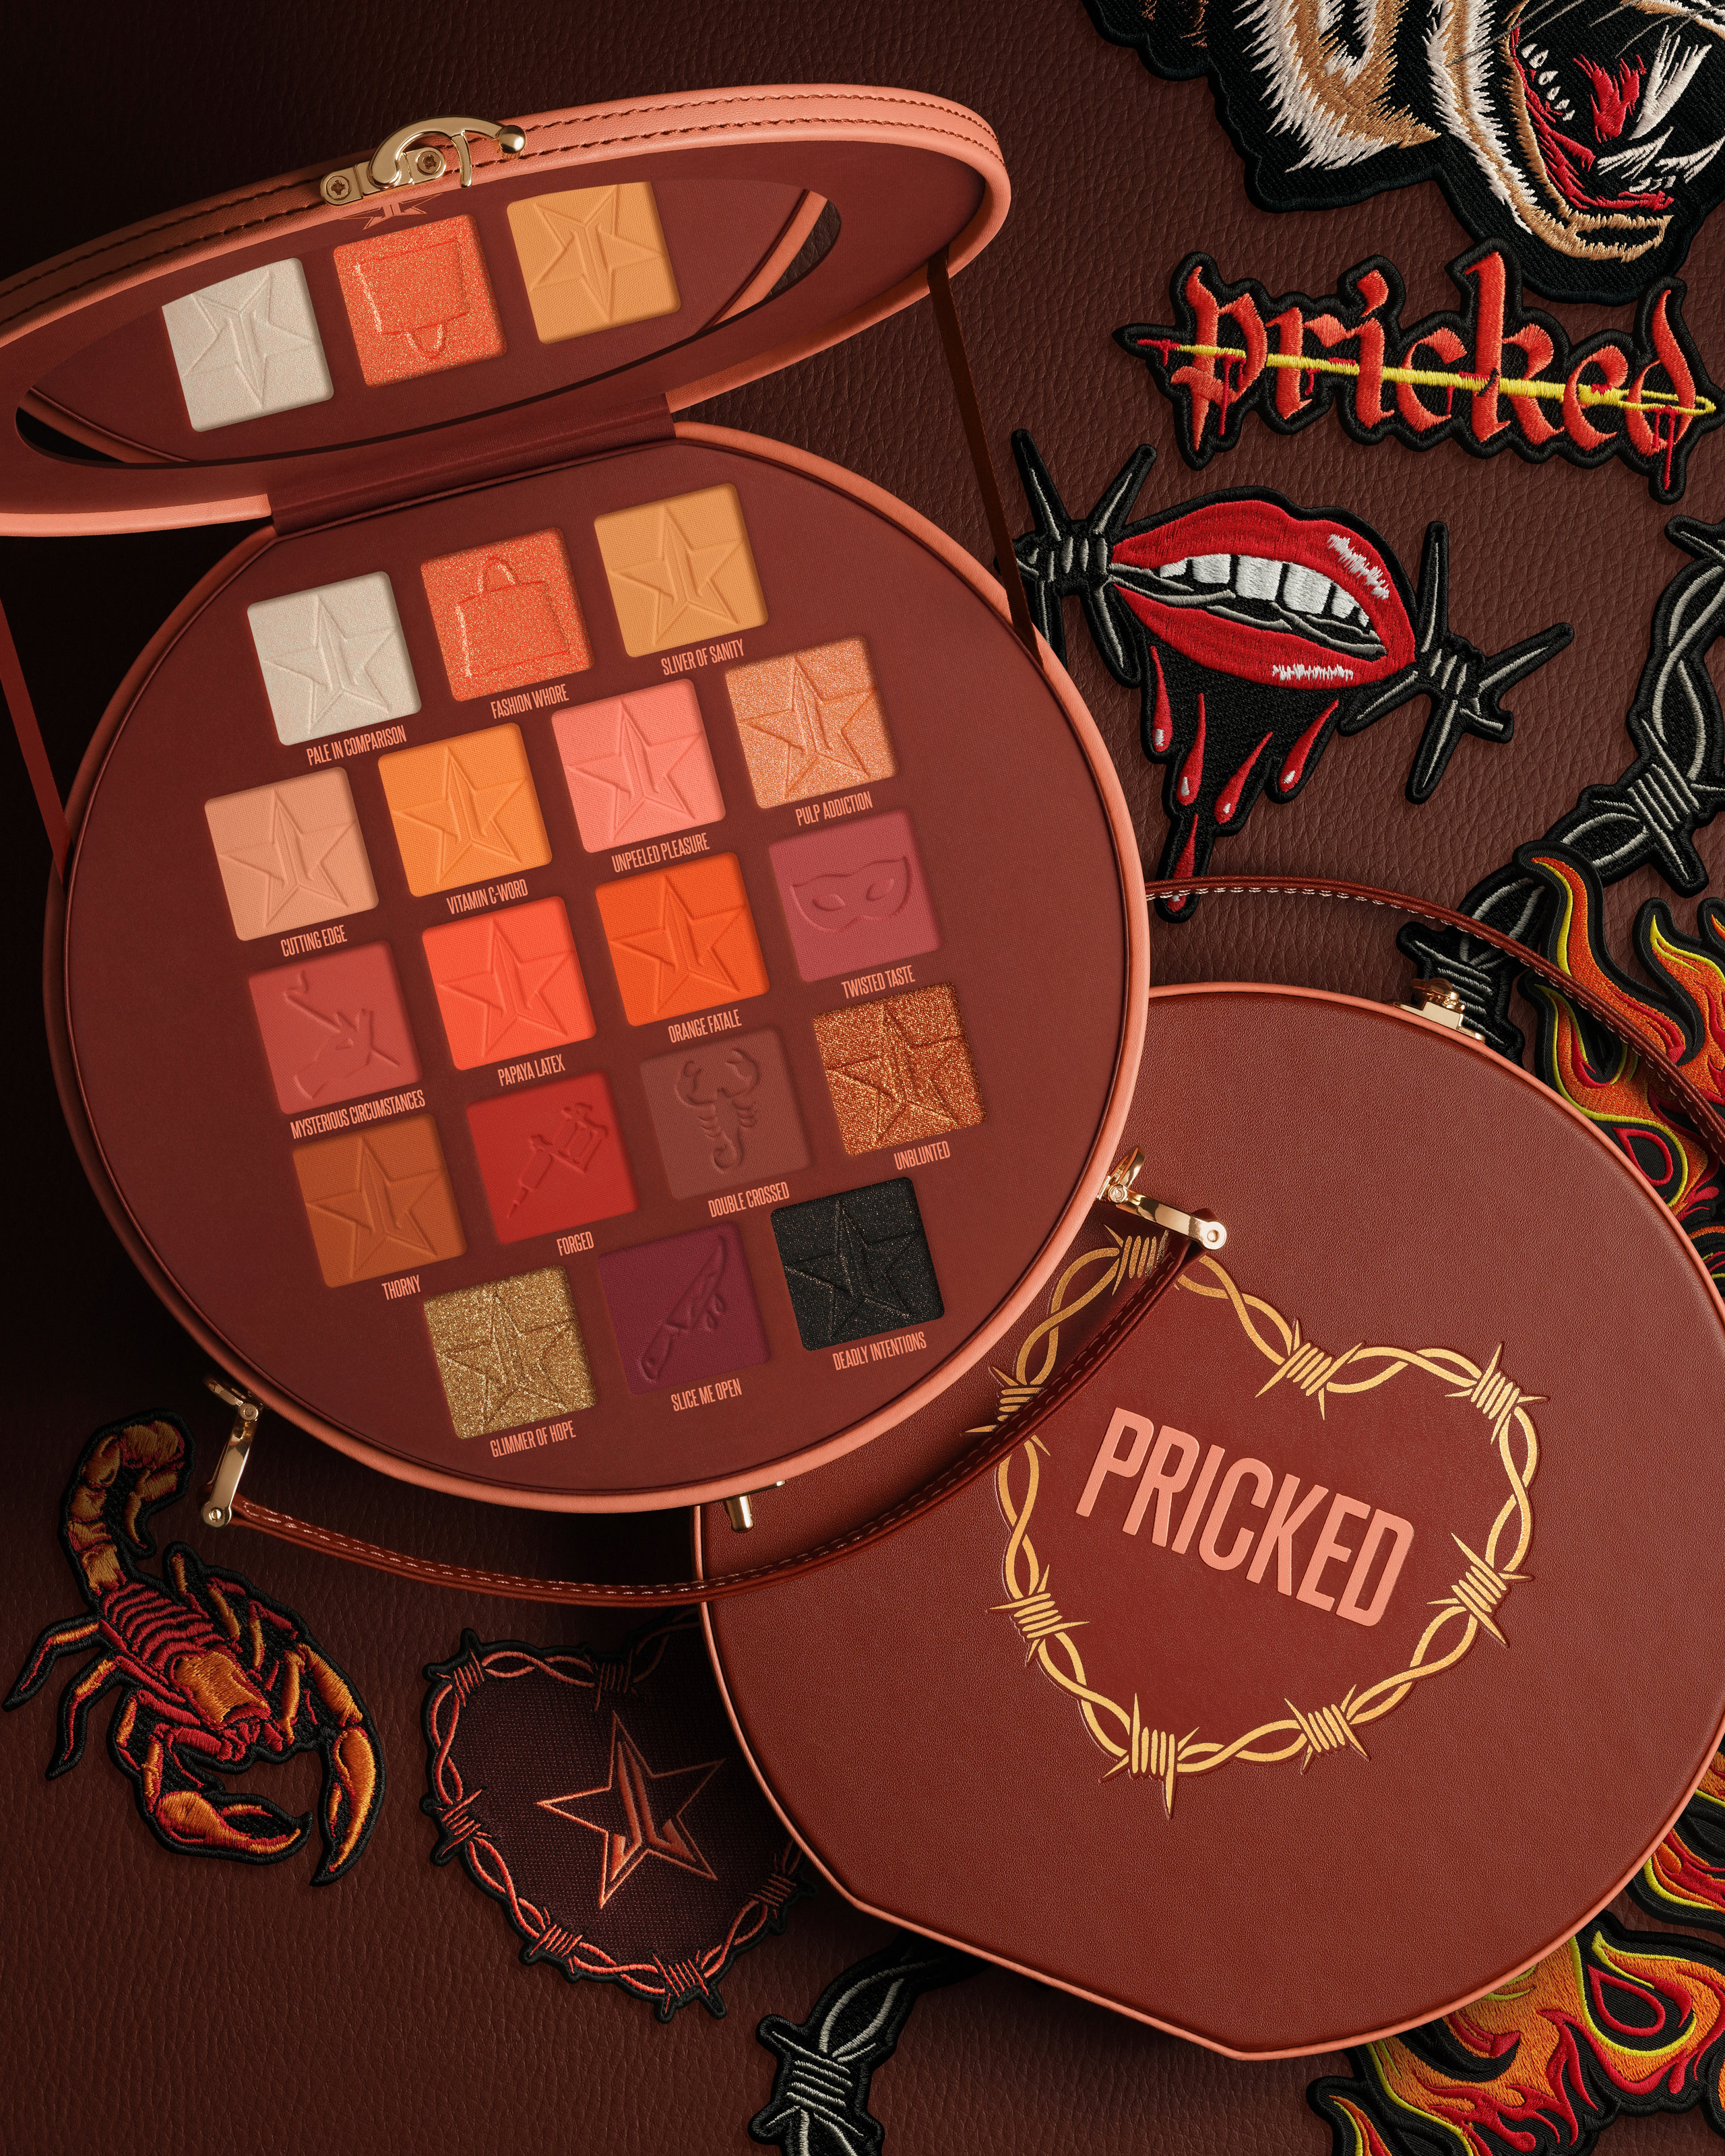 Alternate product image for Pricked Eyeshadow Palette shown with the description.